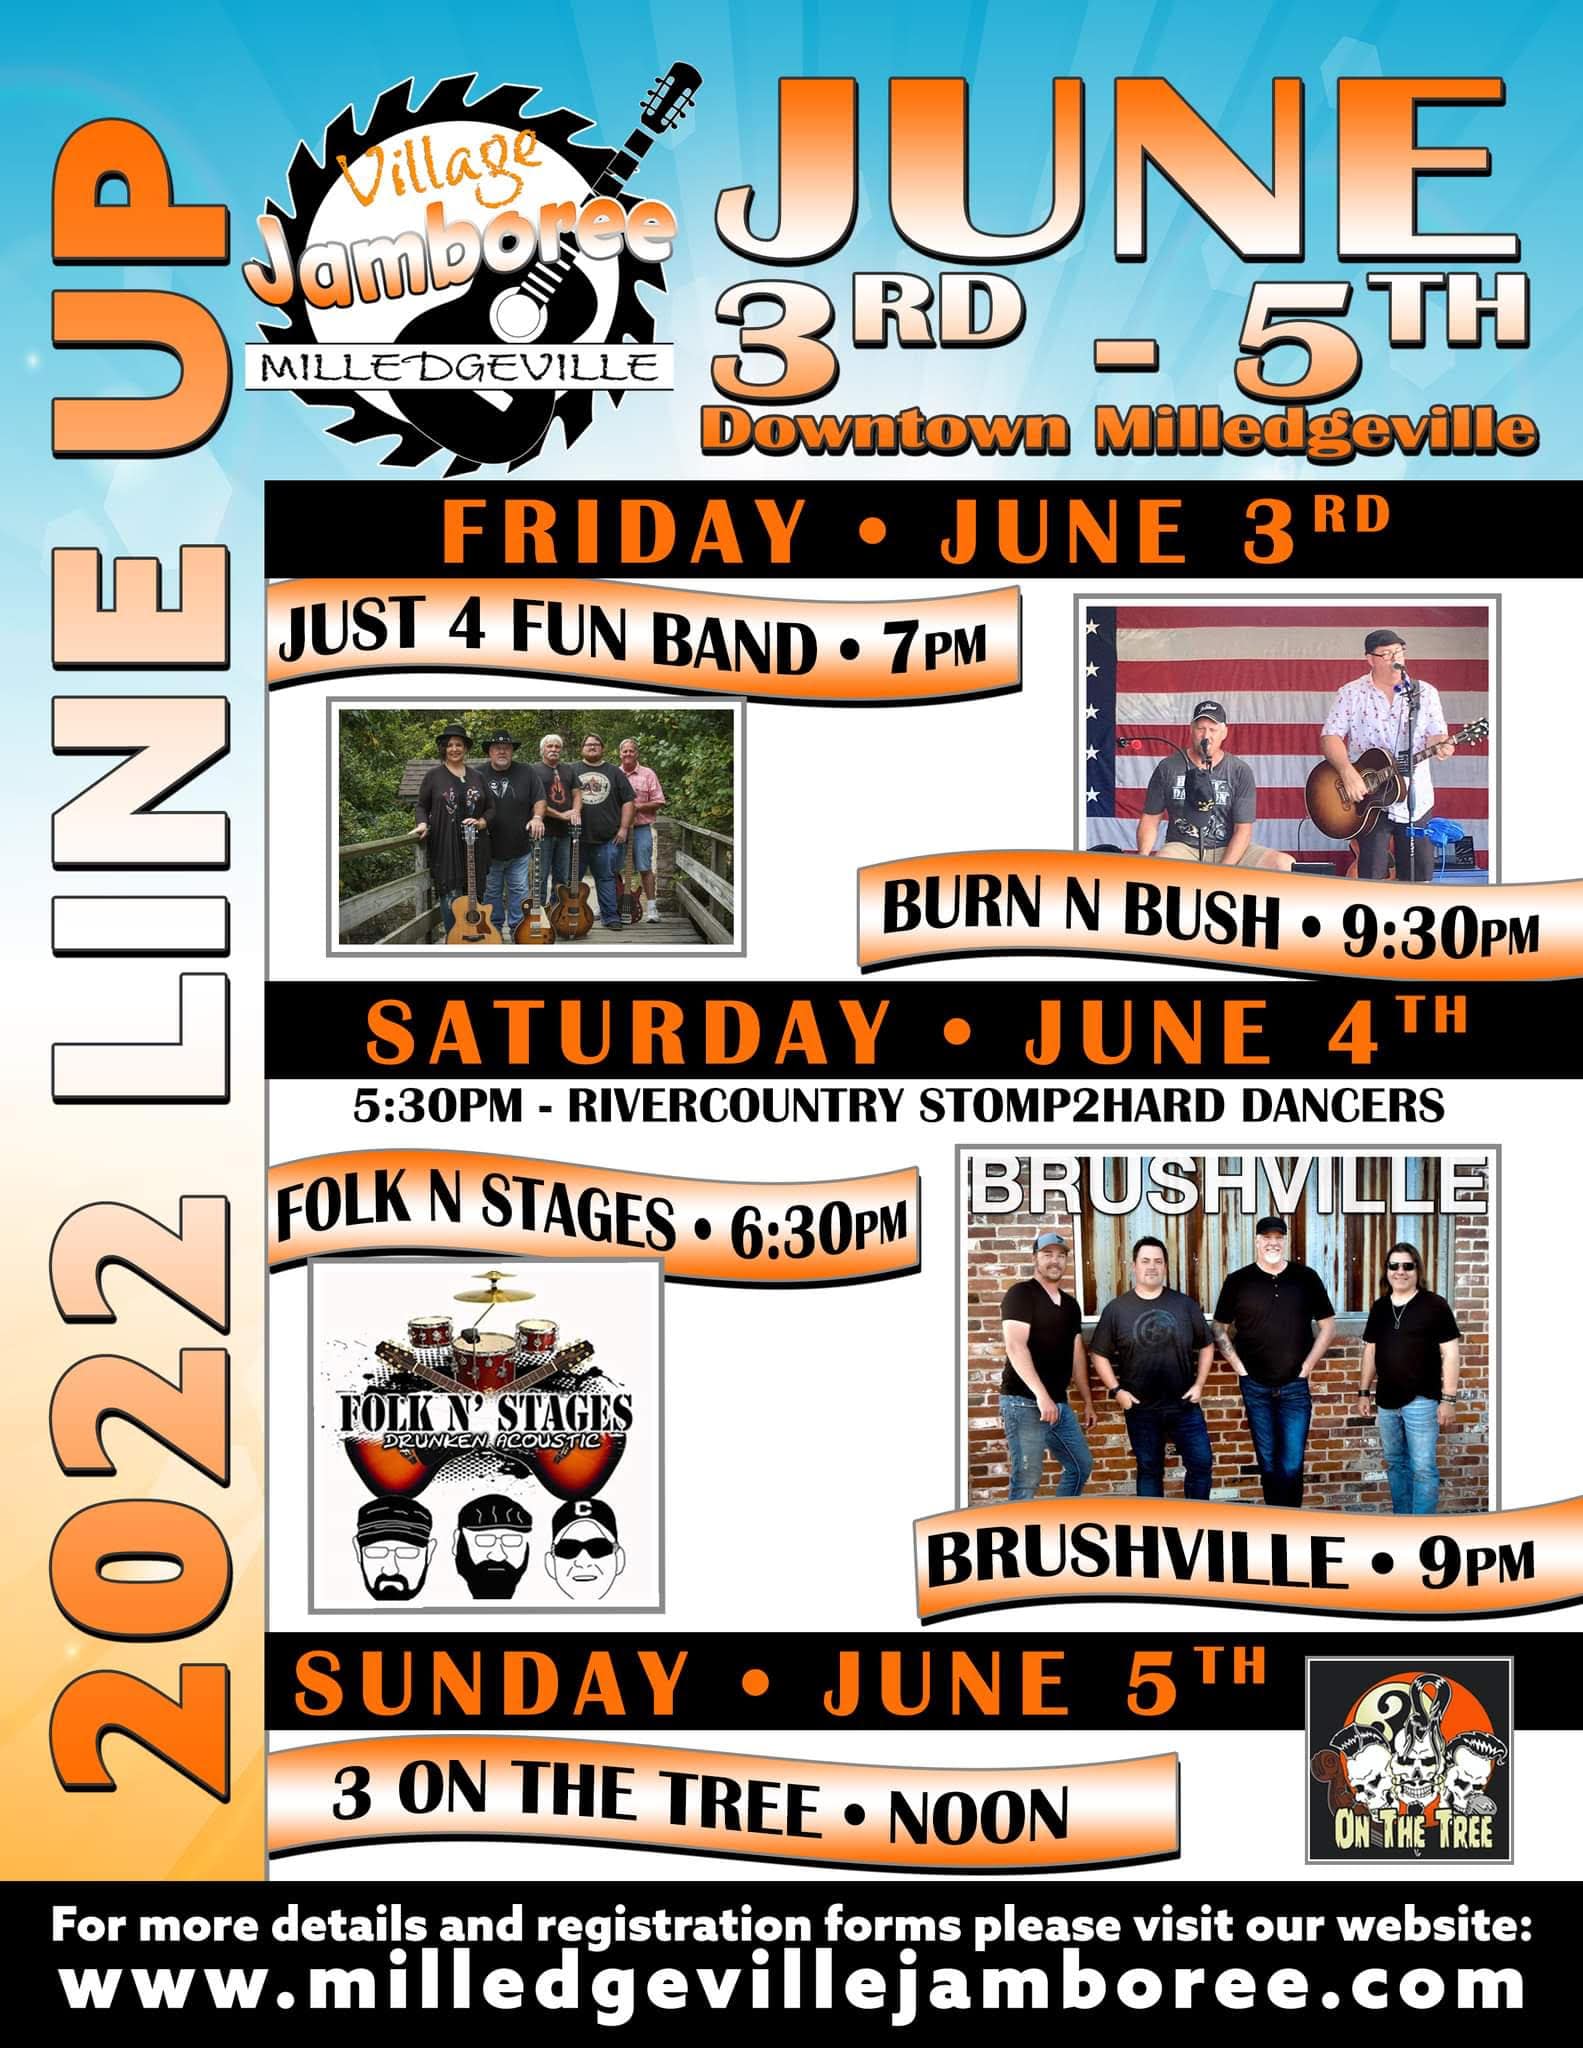 A flyer for the Milledgeville Village Jamboree, which will take place June 3rd through 5th, 2022. There will be performances by the Just 4 Fun Band, Burn N Bush, Folk N Stages, Brushville, and 3 on the Tree.